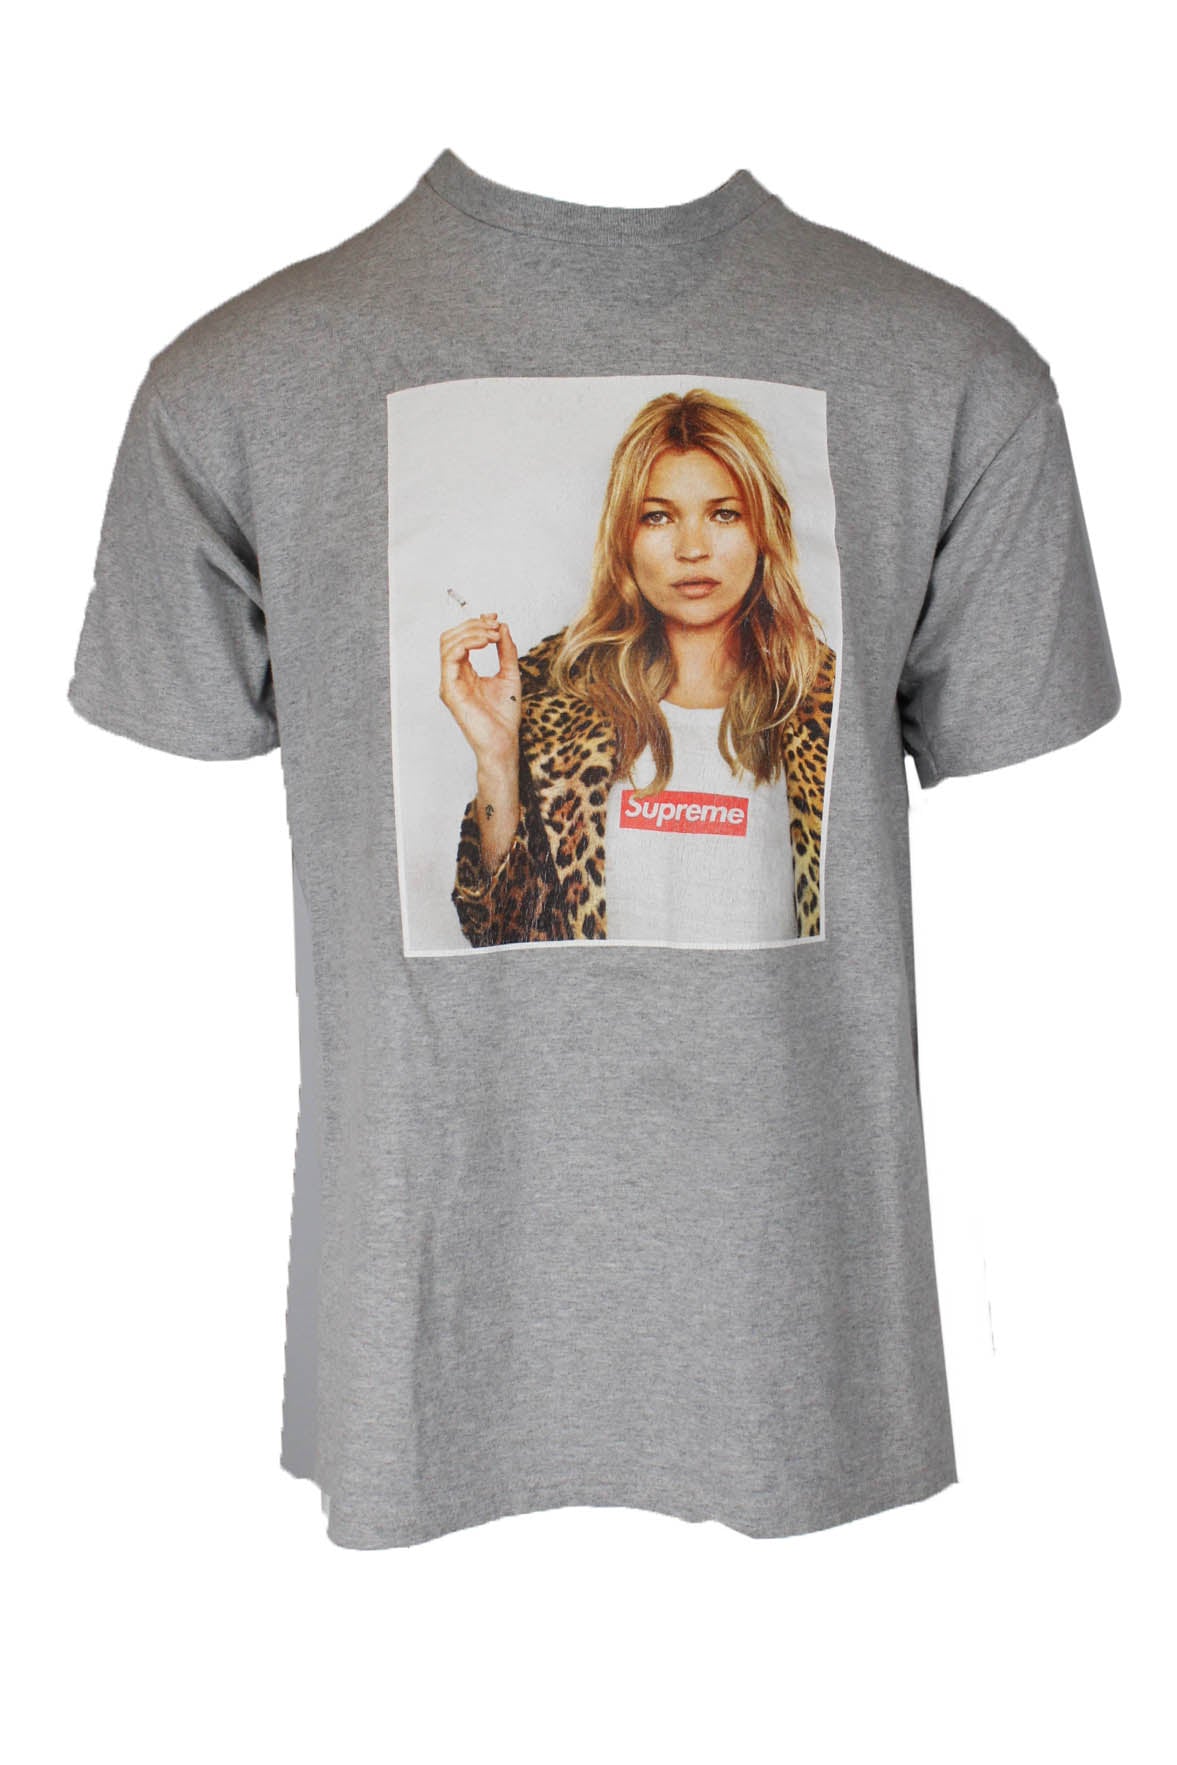 description: supreme kate moss gray short sleeve tee. features crew neckline, short sleeve, loose fit, straight bottom hem, and kate moss smoking print at front. 